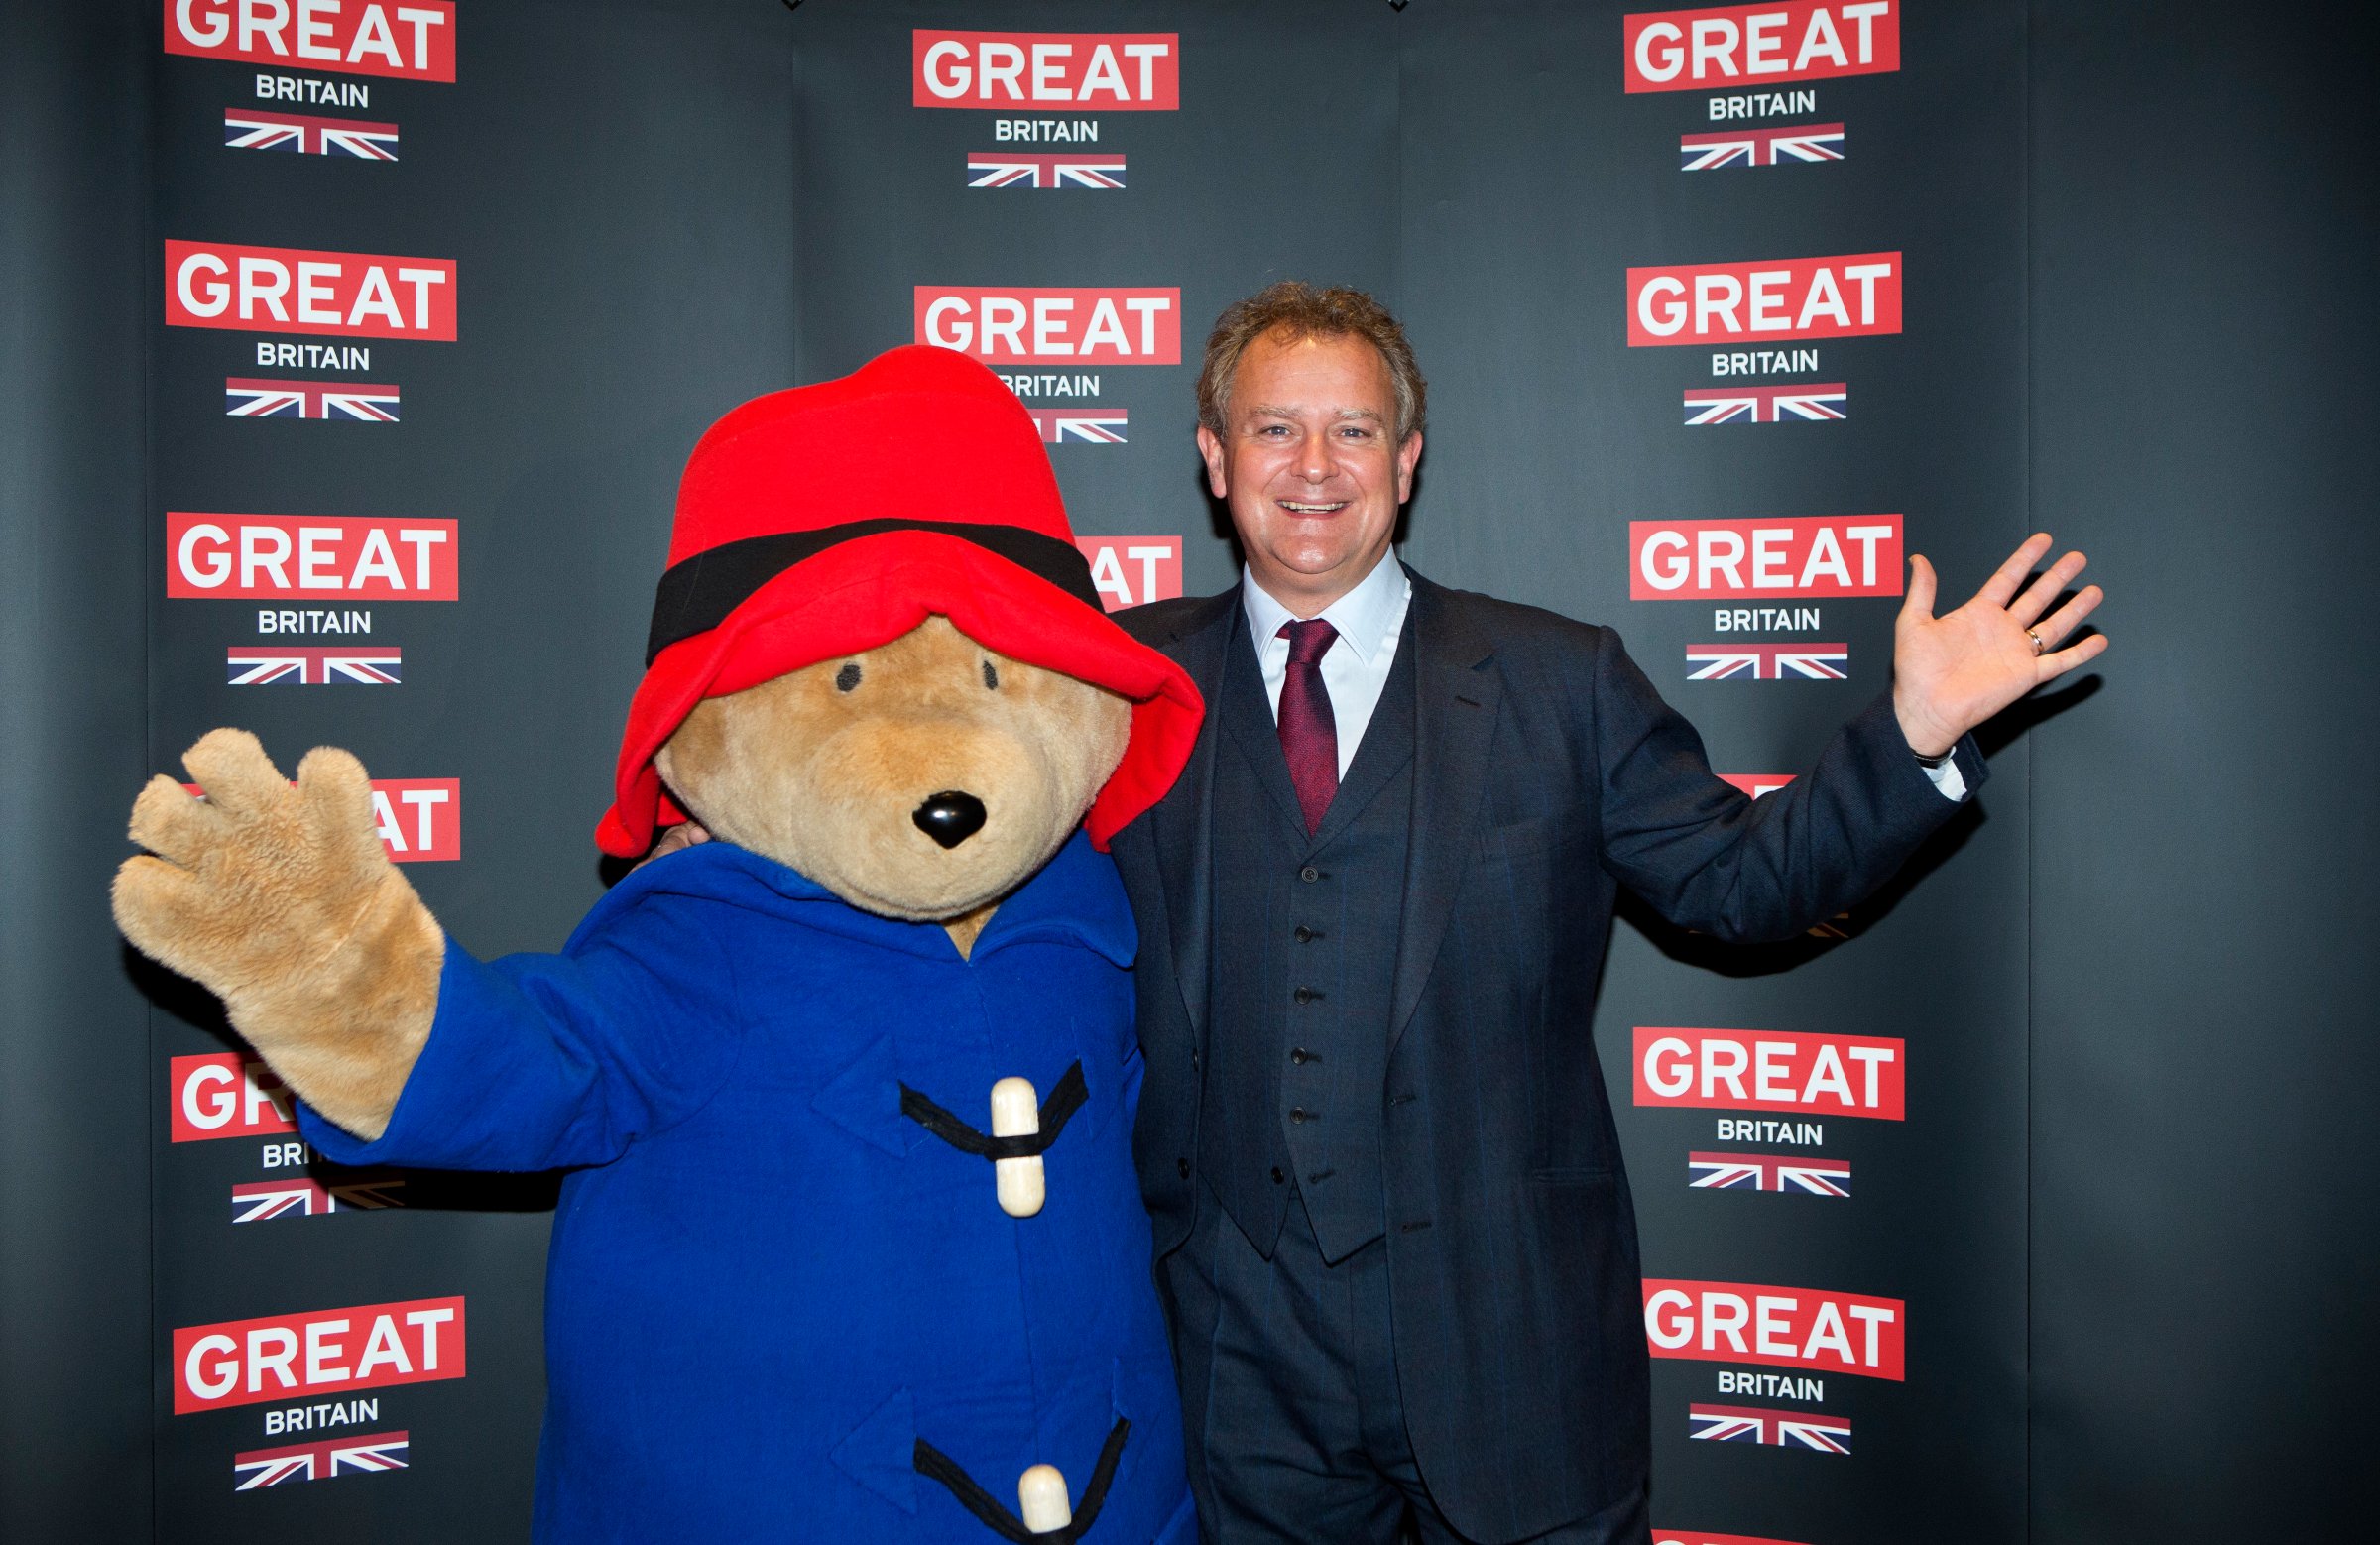 Actor Hugh Bonneville poses with a person dressed as Paddington Bear during the photo call for the film Paddington Bear at The British Embassy in Berlin, during the International Film Festival Berlinale, Feb. 7, 2014.